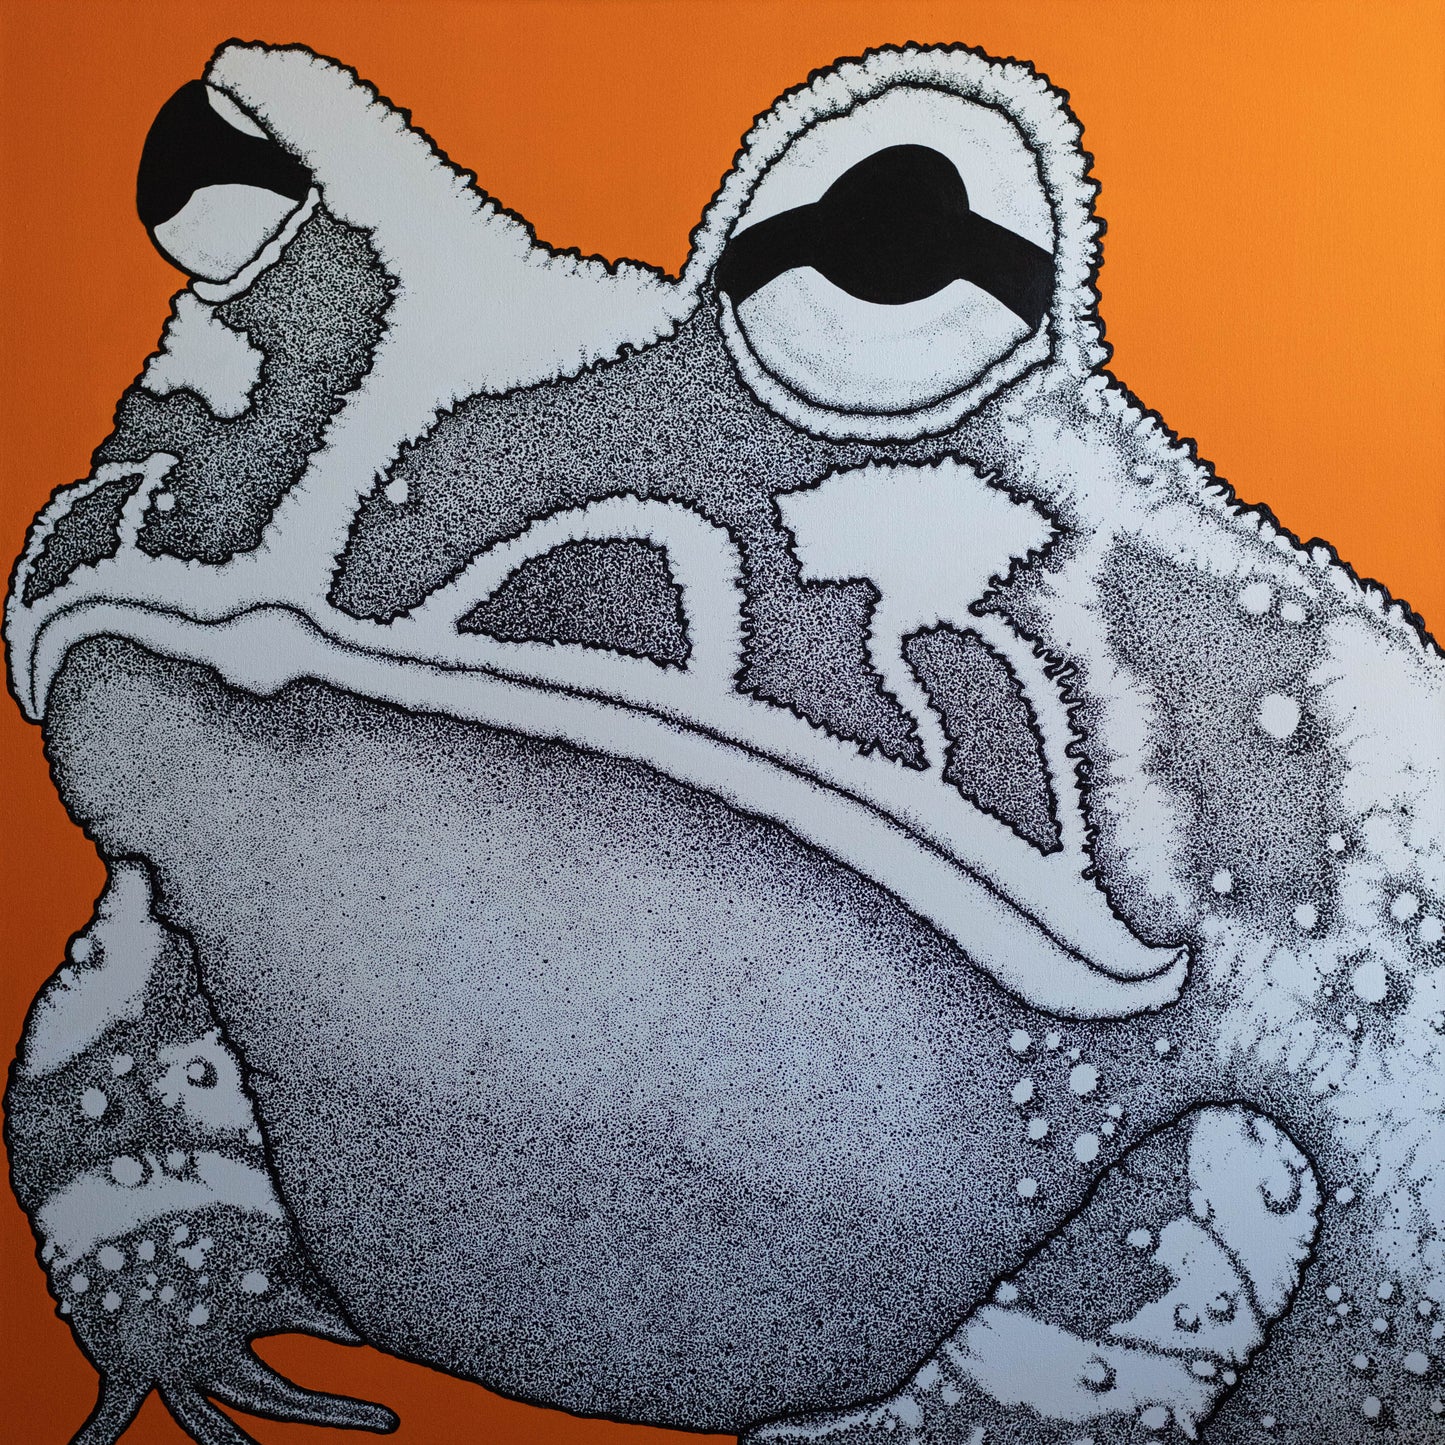 Frog by Richard Lilley - Mourlot Editions - Fine_Art - Poster - Lithograph - Wall Art - Vintage - Prints - Original